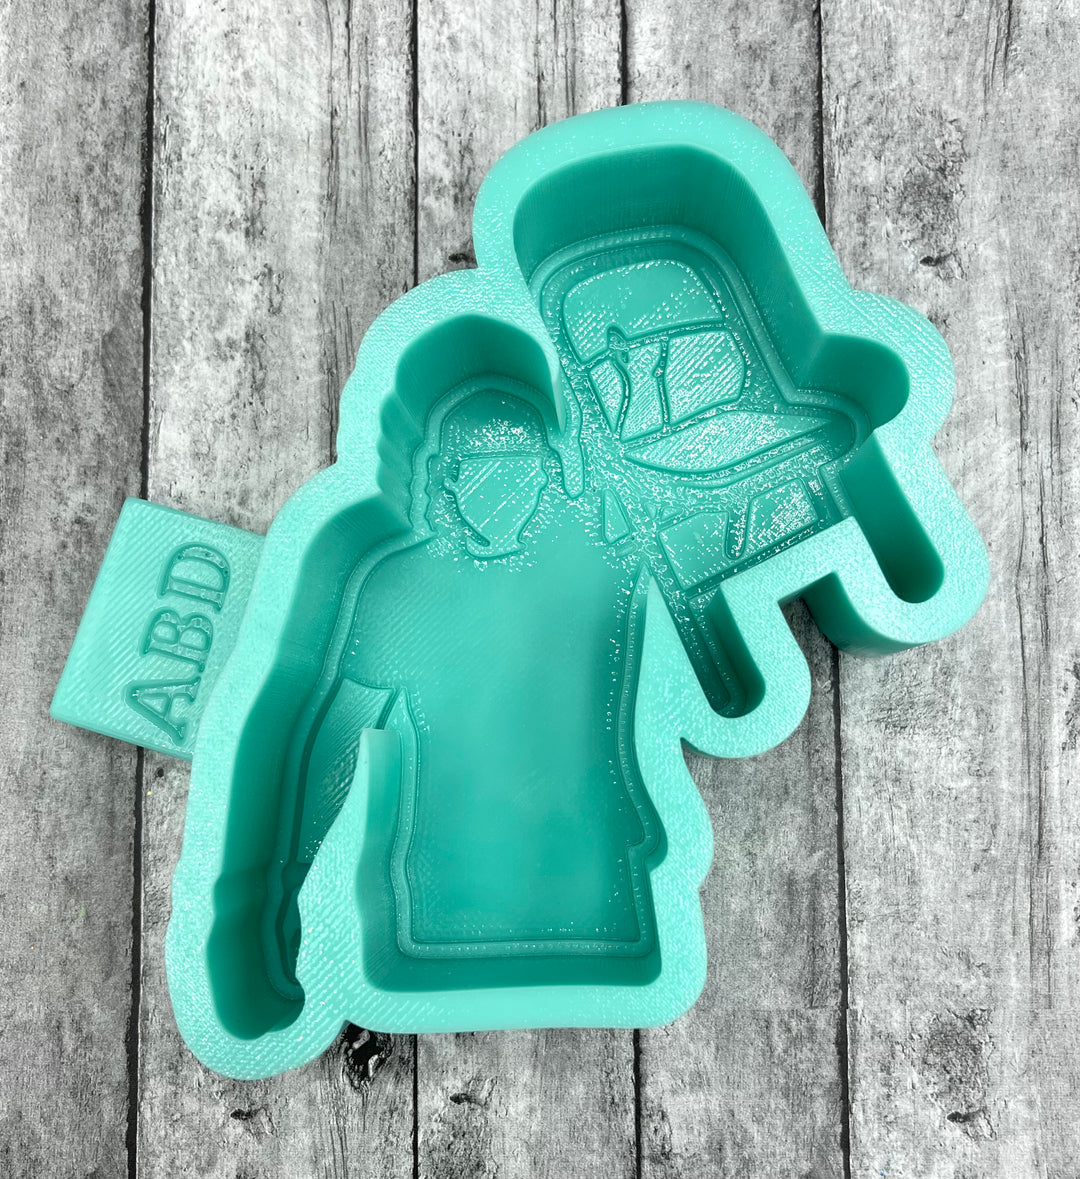 Man with Chair Freshie Silicone Mold